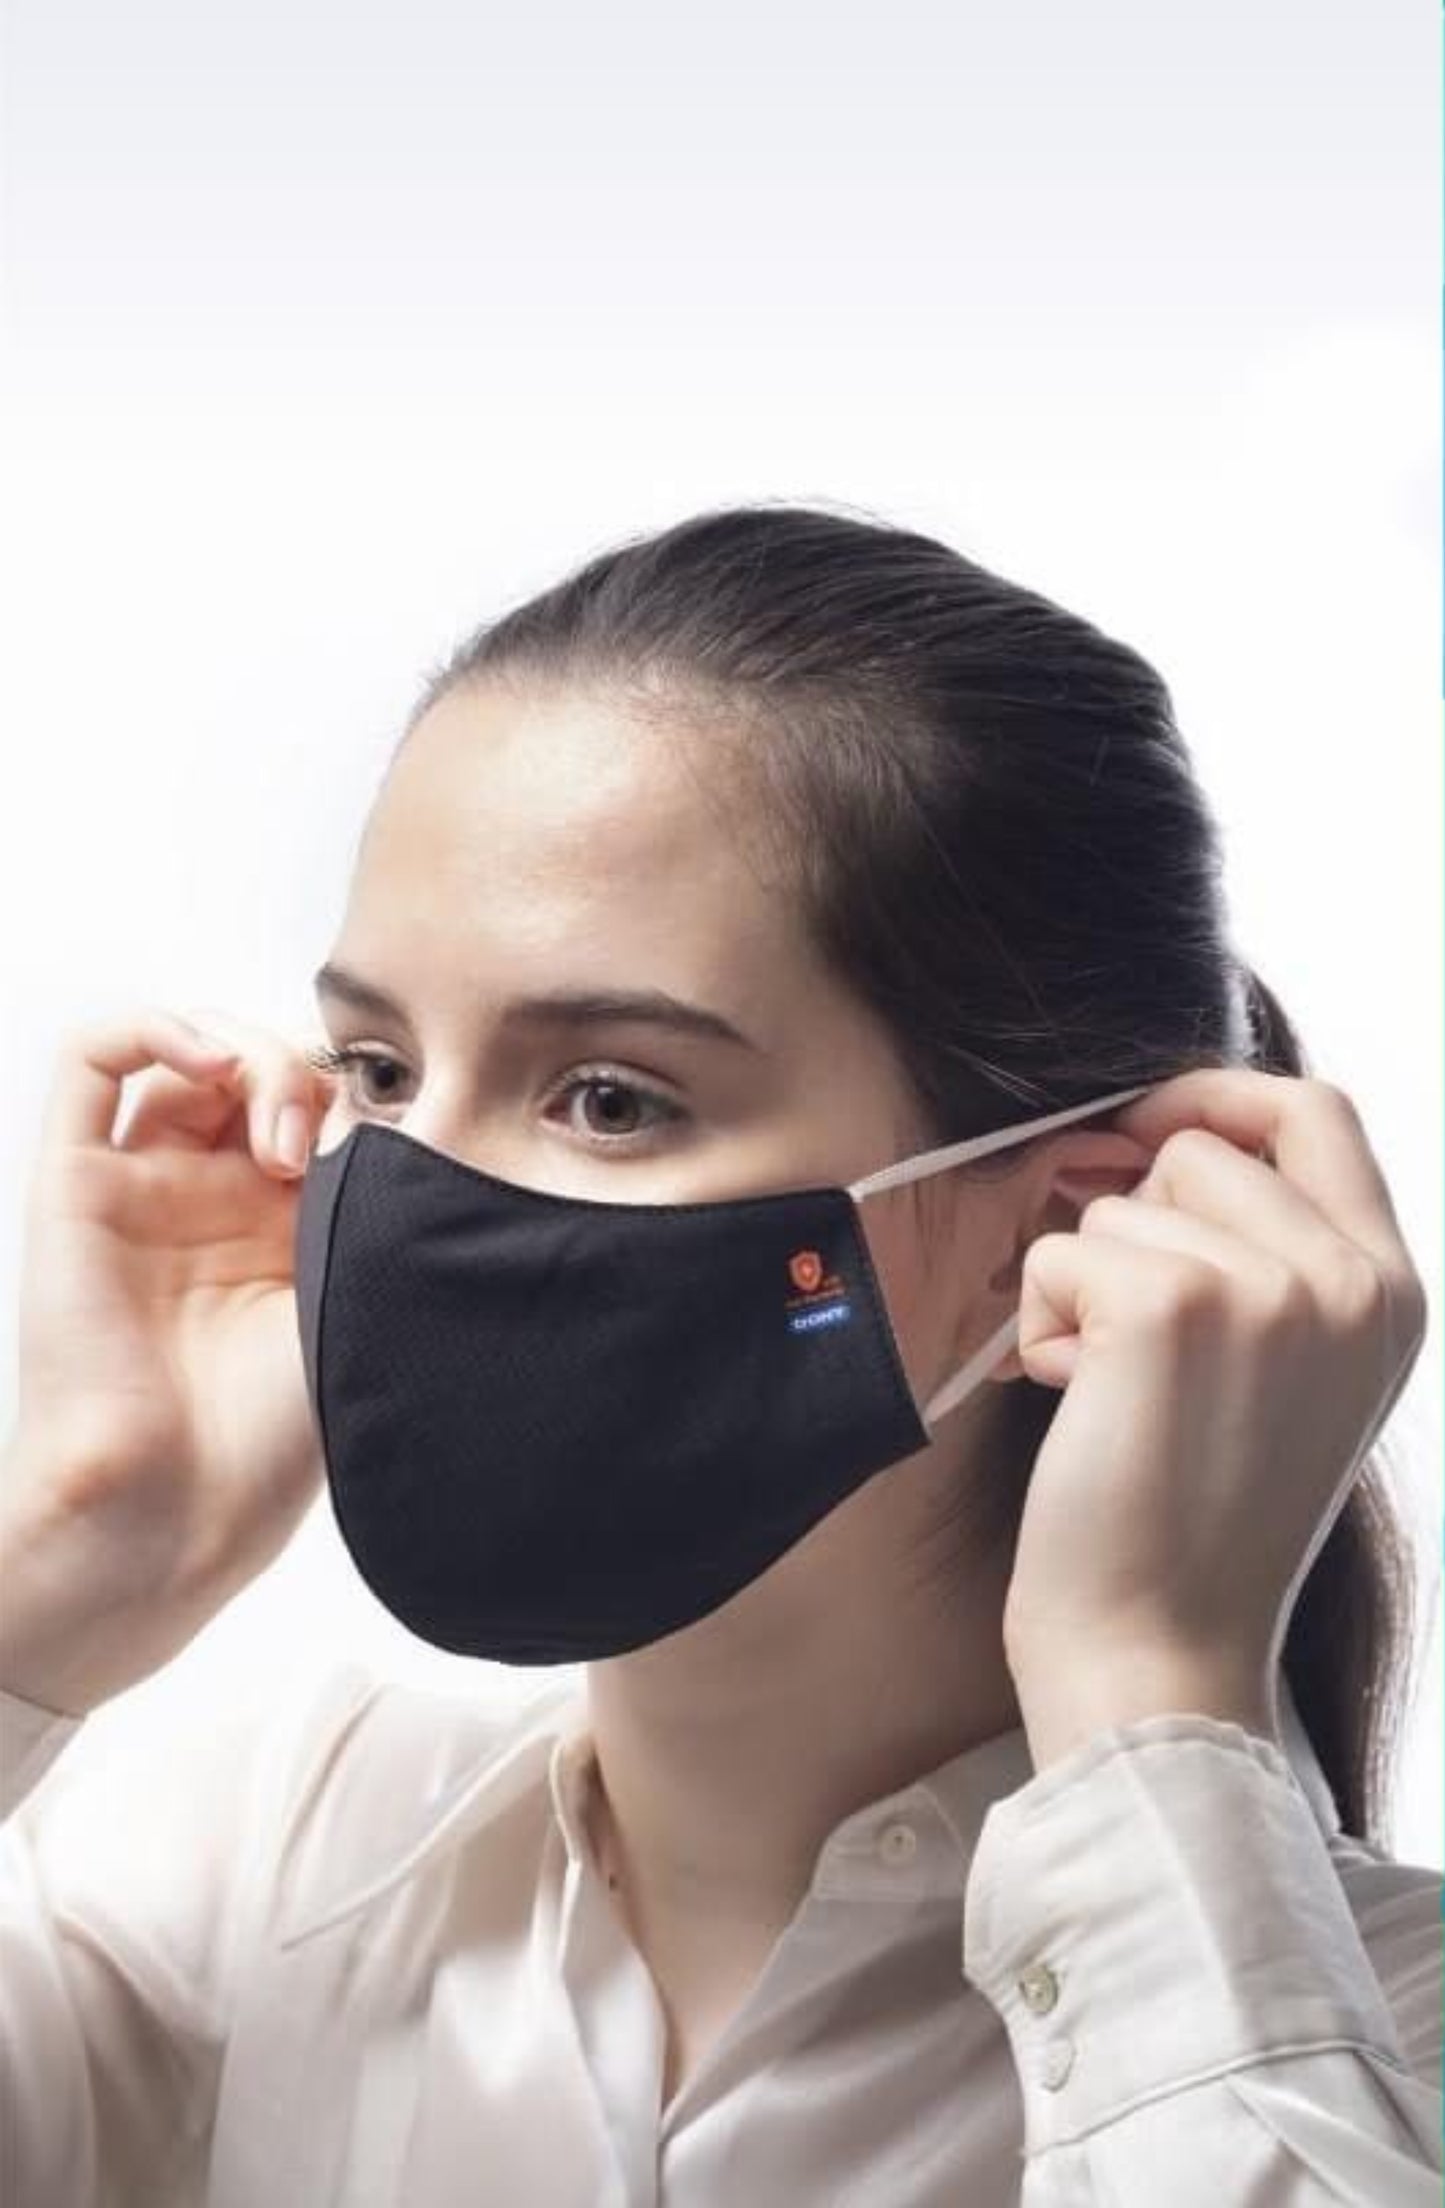 Antibacterial 3 Layer Cloth Mask Sealed In Sterilized Bag - USA Medical Supply